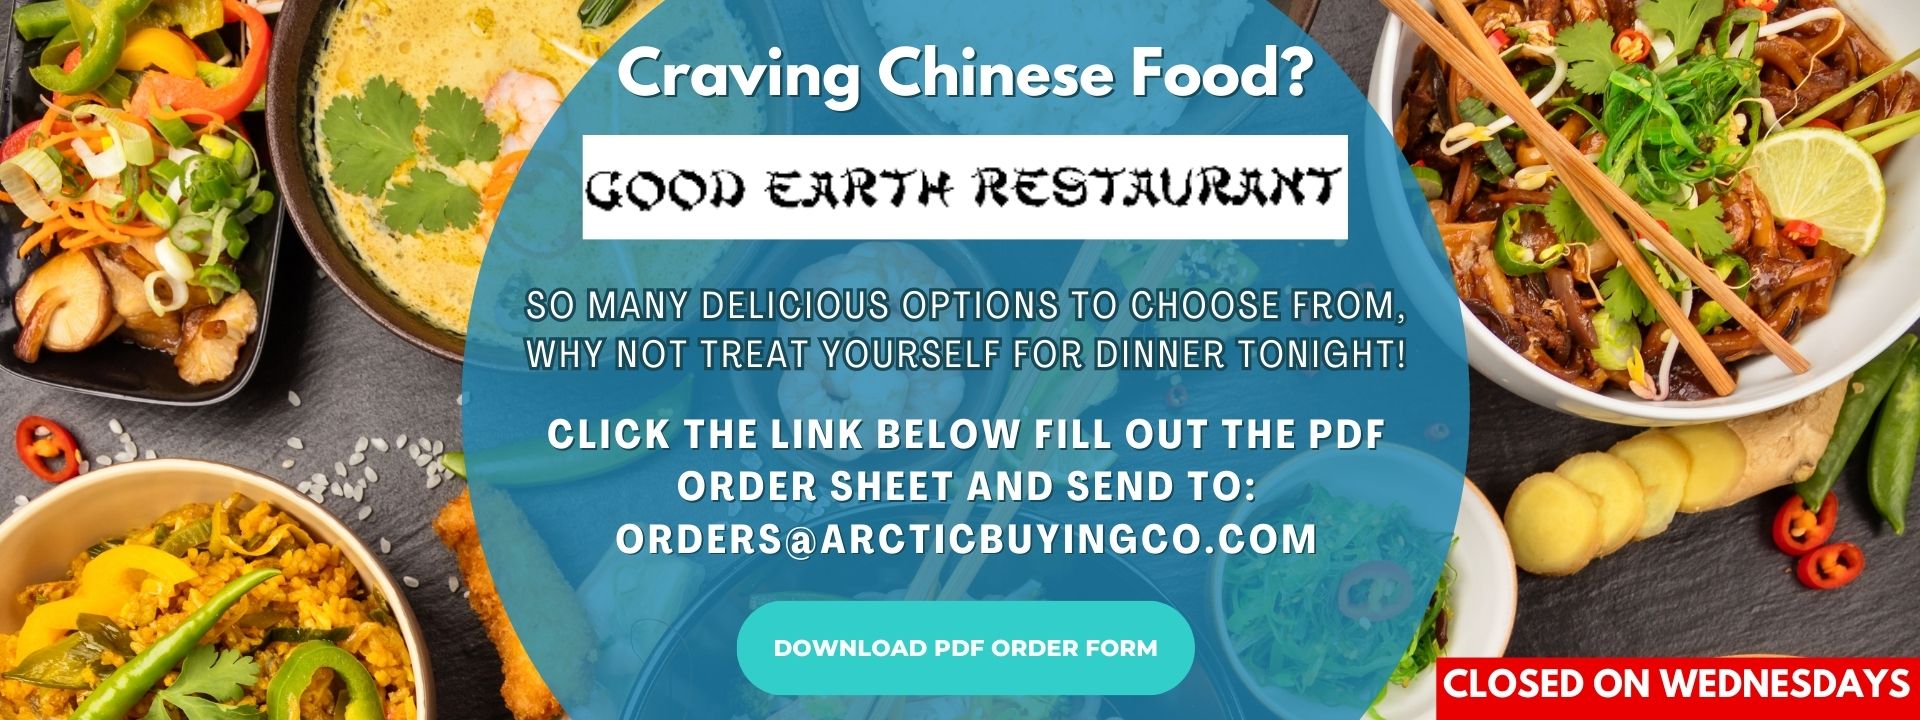 Craving Chinese Food? Good Earth Restaurant